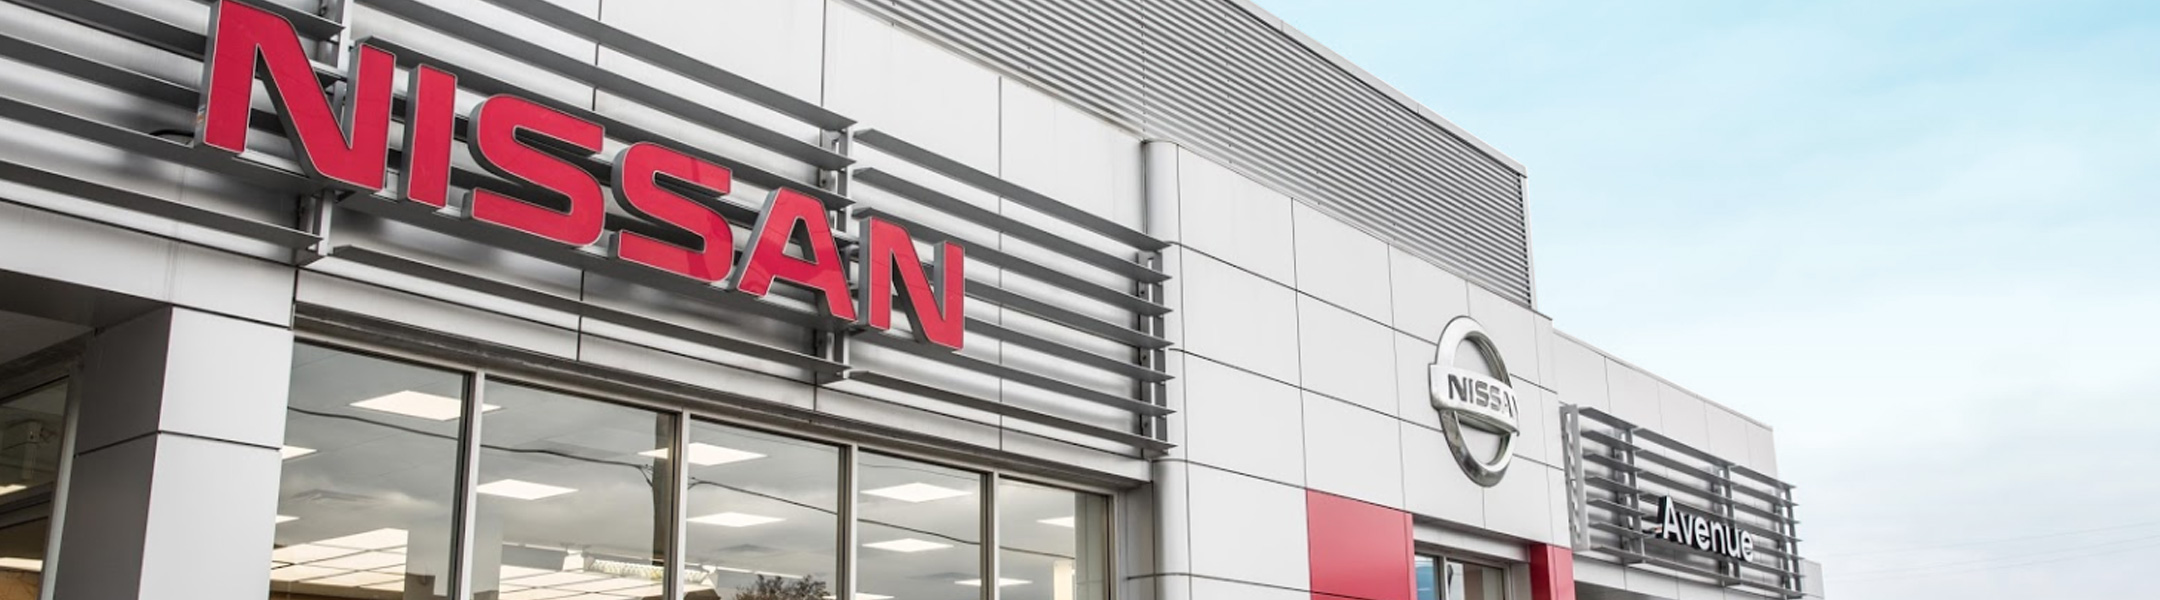 About Avenue Nissan | Toronto, ON